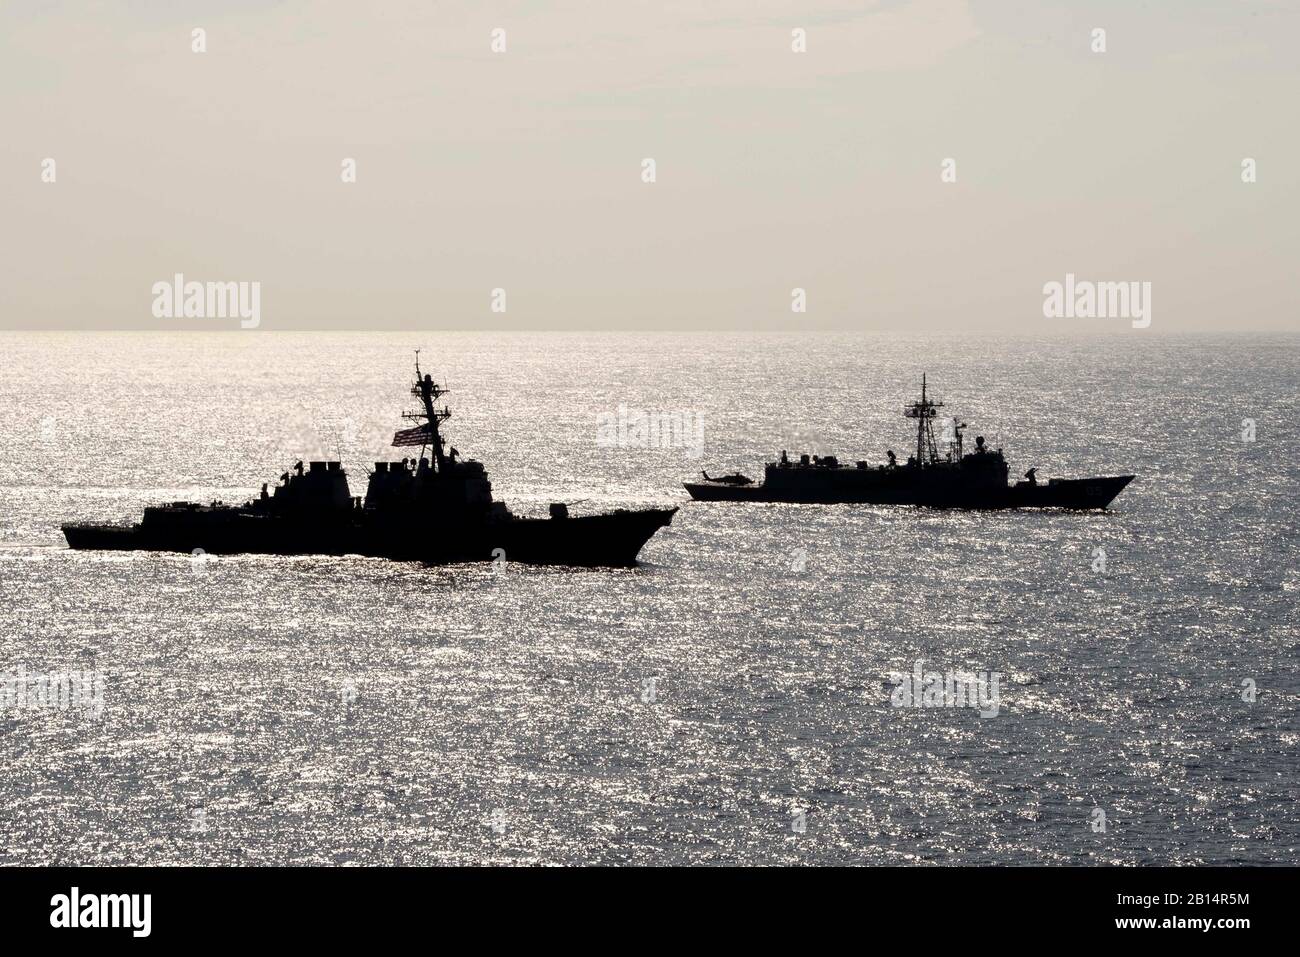 190418-N-UI104-0745     PHILIPPINE SEA (April 18, 2019) The Arleigh Burke-class guided-missile destroyer USS Preble (DDG 88) and the Royal Australian Navy Adelaide-class guided-missile frigate HMAS Melbourne (FFG 05) transit in formation during a cooperative deployment. Preble and Melbourne are participating in a cooperative deployment in order to improve on maritime capabilities between partners.  Preble is deployed to the U.S 7th Fleet area of operations in support of security and stability in the Indo-Pacific region. (U.S. Navy photo by Mass Communication Specialist 1st Class Bryan Niegel/R Stock Photo